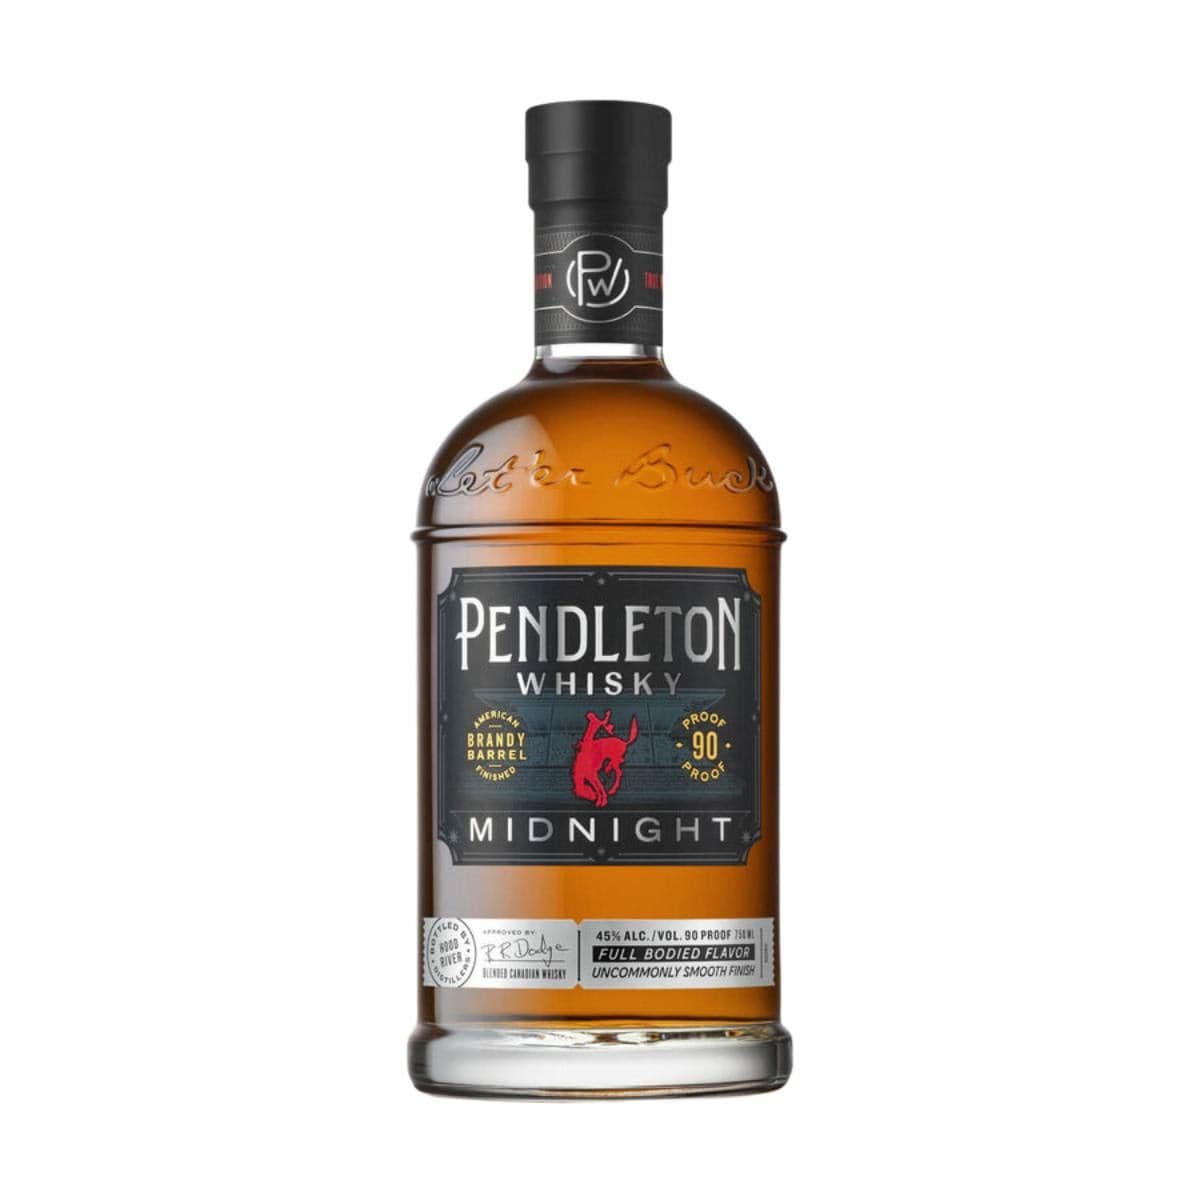 Pendleton Whisky's Midnight and 1910 Rye